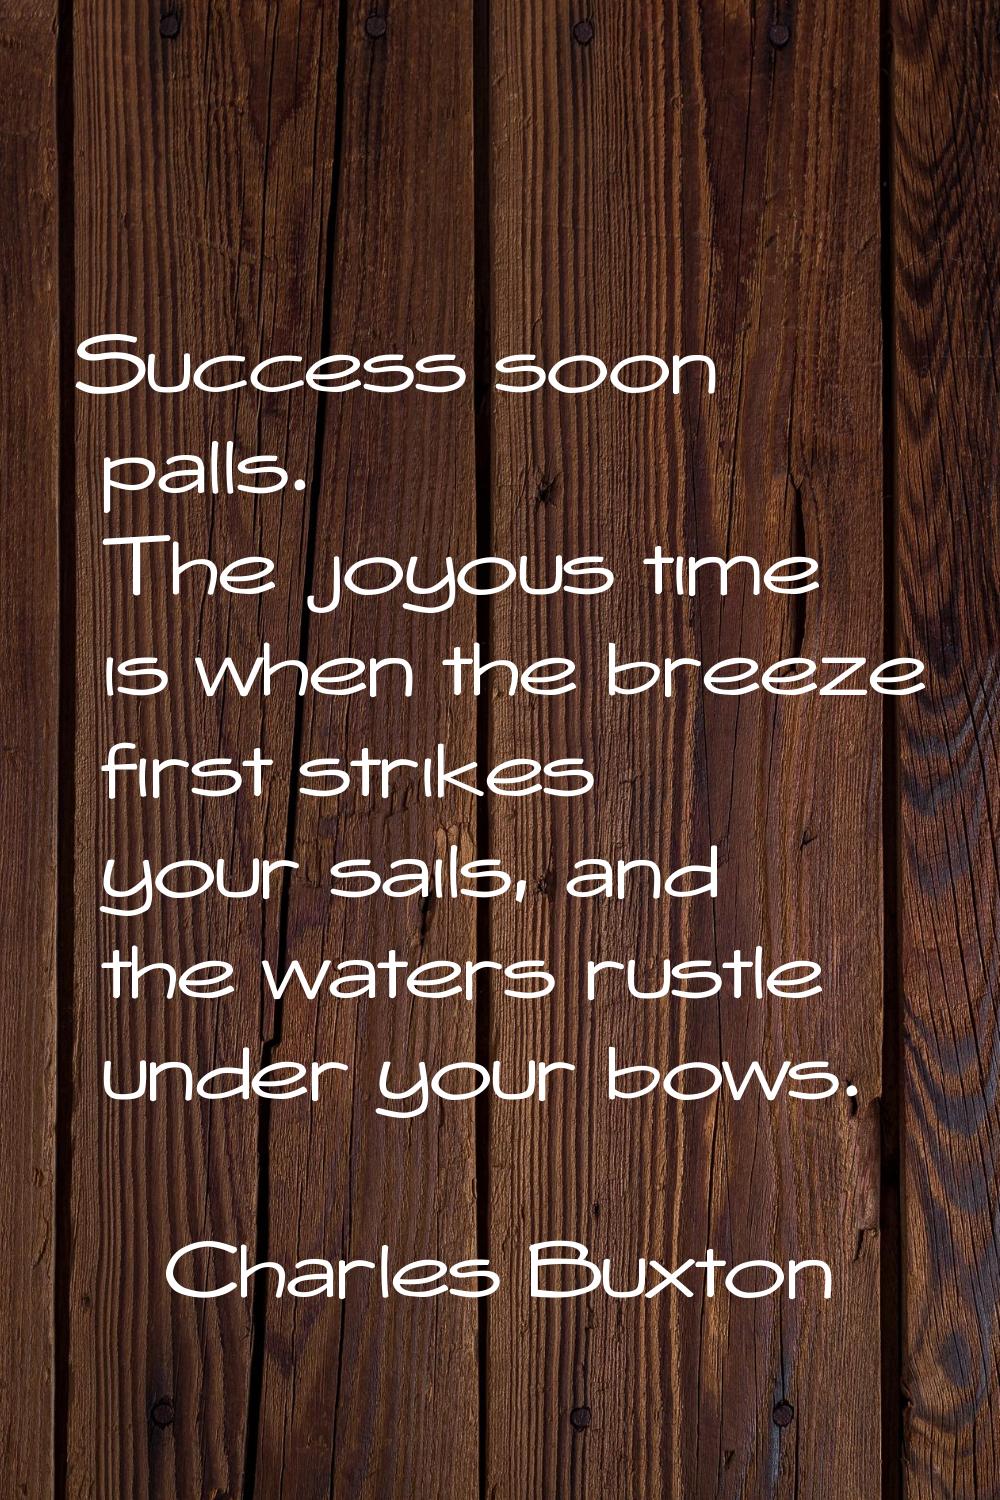 Success soon palls. The joyous time is when the breeze first strikes your sails, and the waters rus